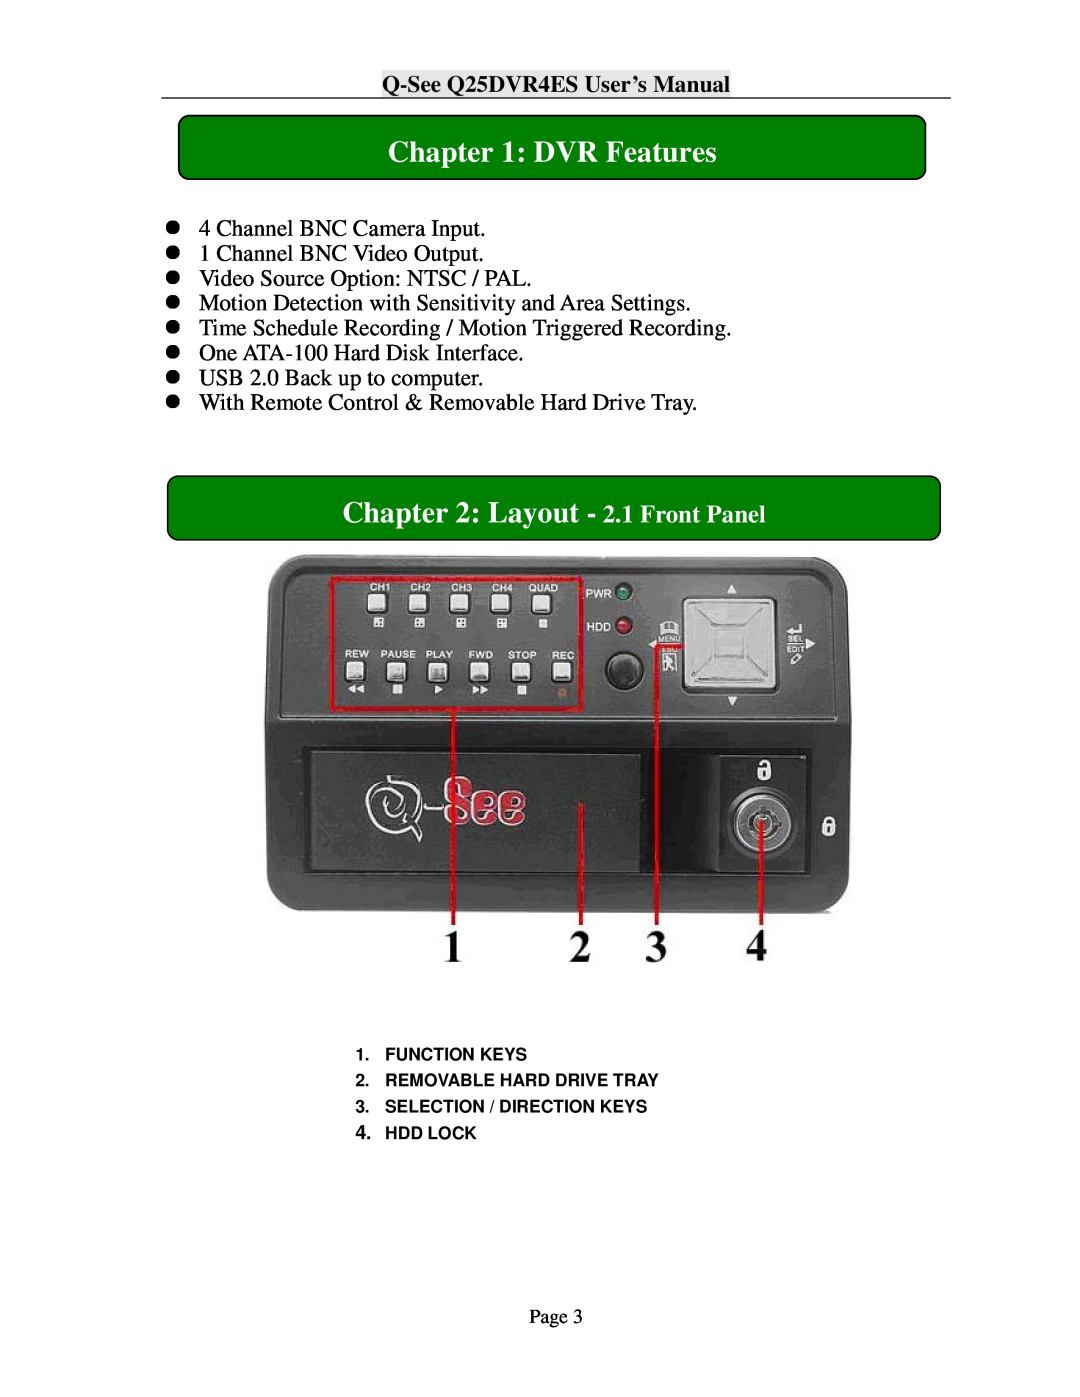 Q-See user manual DVR Features, Layout - 2.1 Front Panel, Q-SeeQ25DVR4ES User’s Manual 